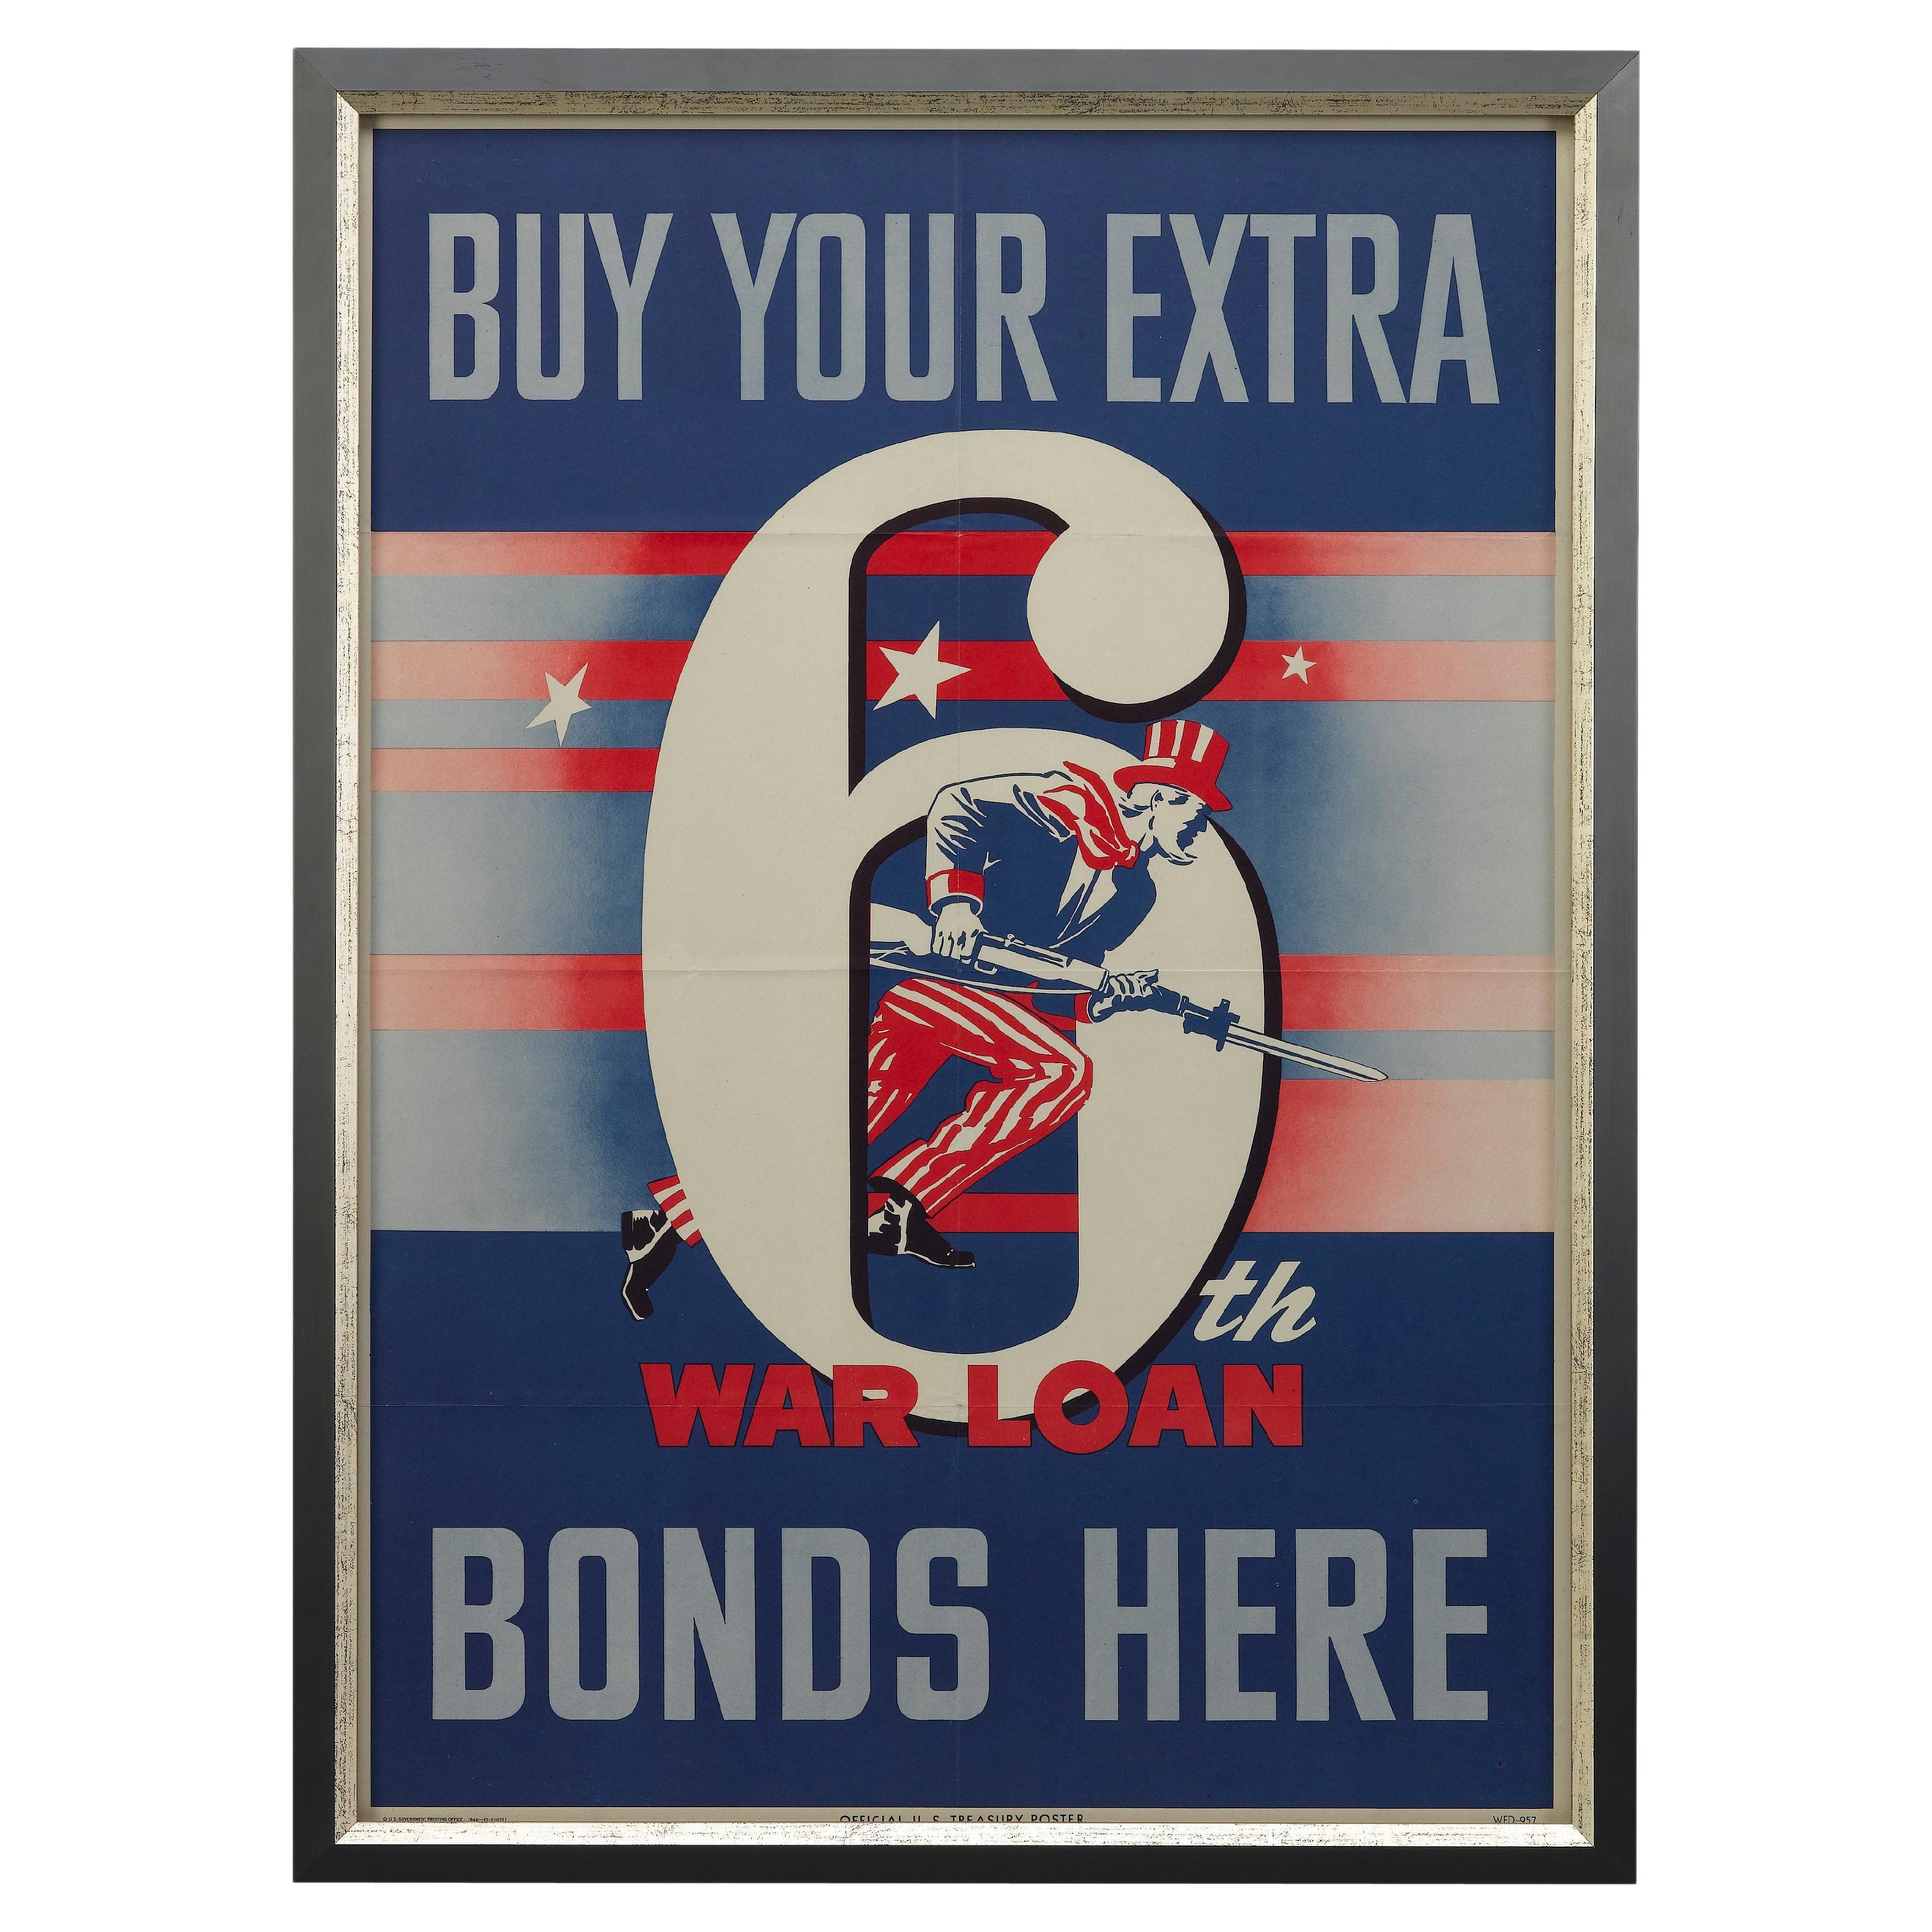 "Buy Your Extra 6th War Loan Bonds Here" Vintage WWII Poster, 1944 For Sale